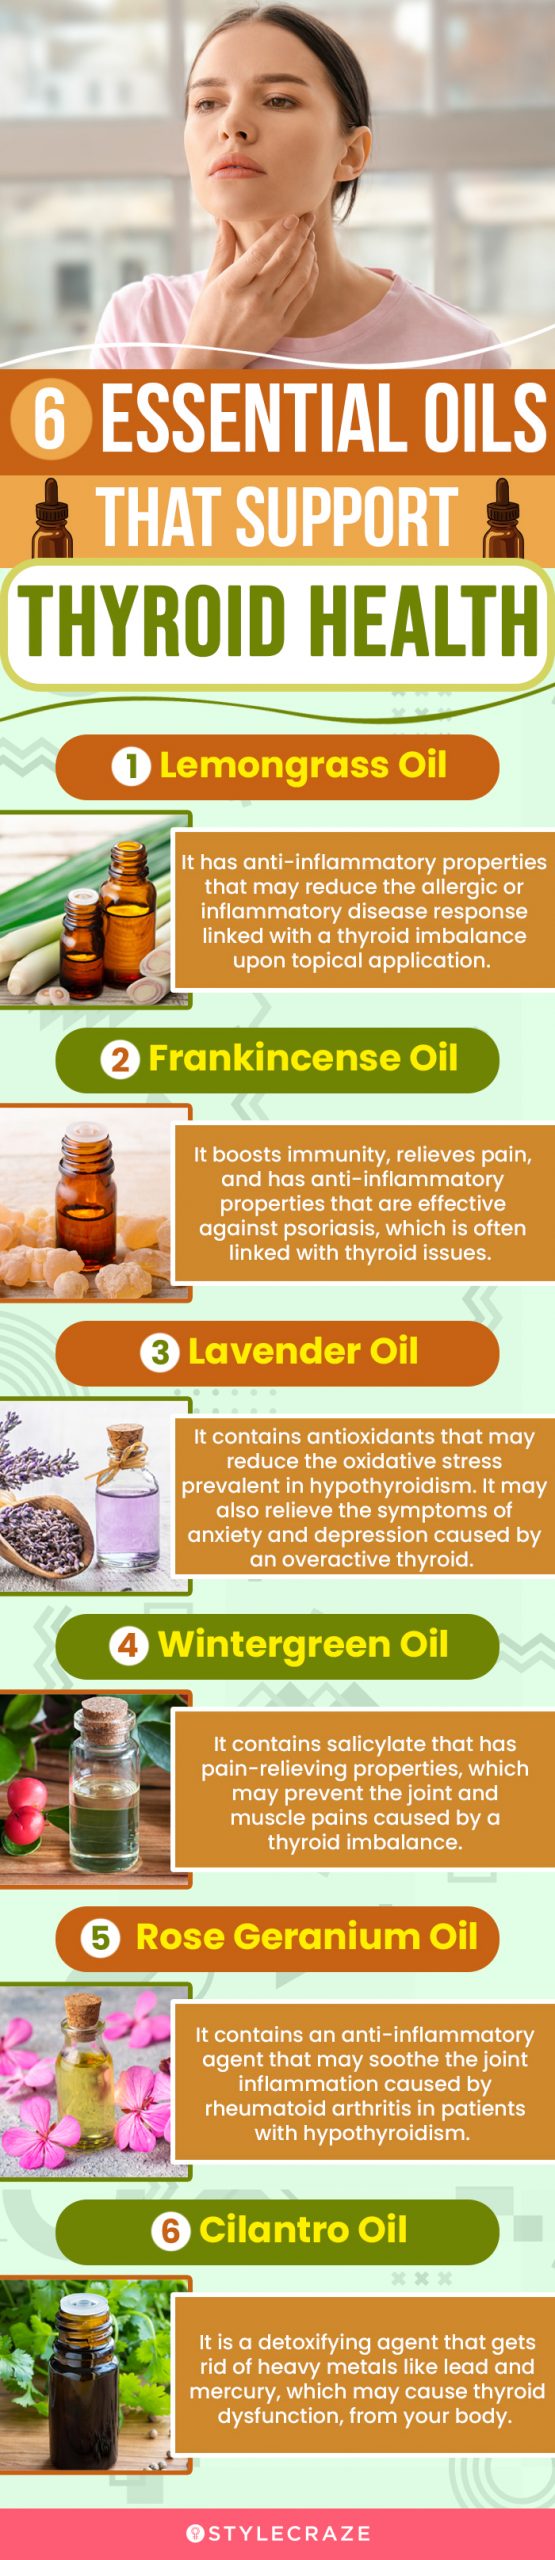 6 essential oils that support thyroid health (infographic)